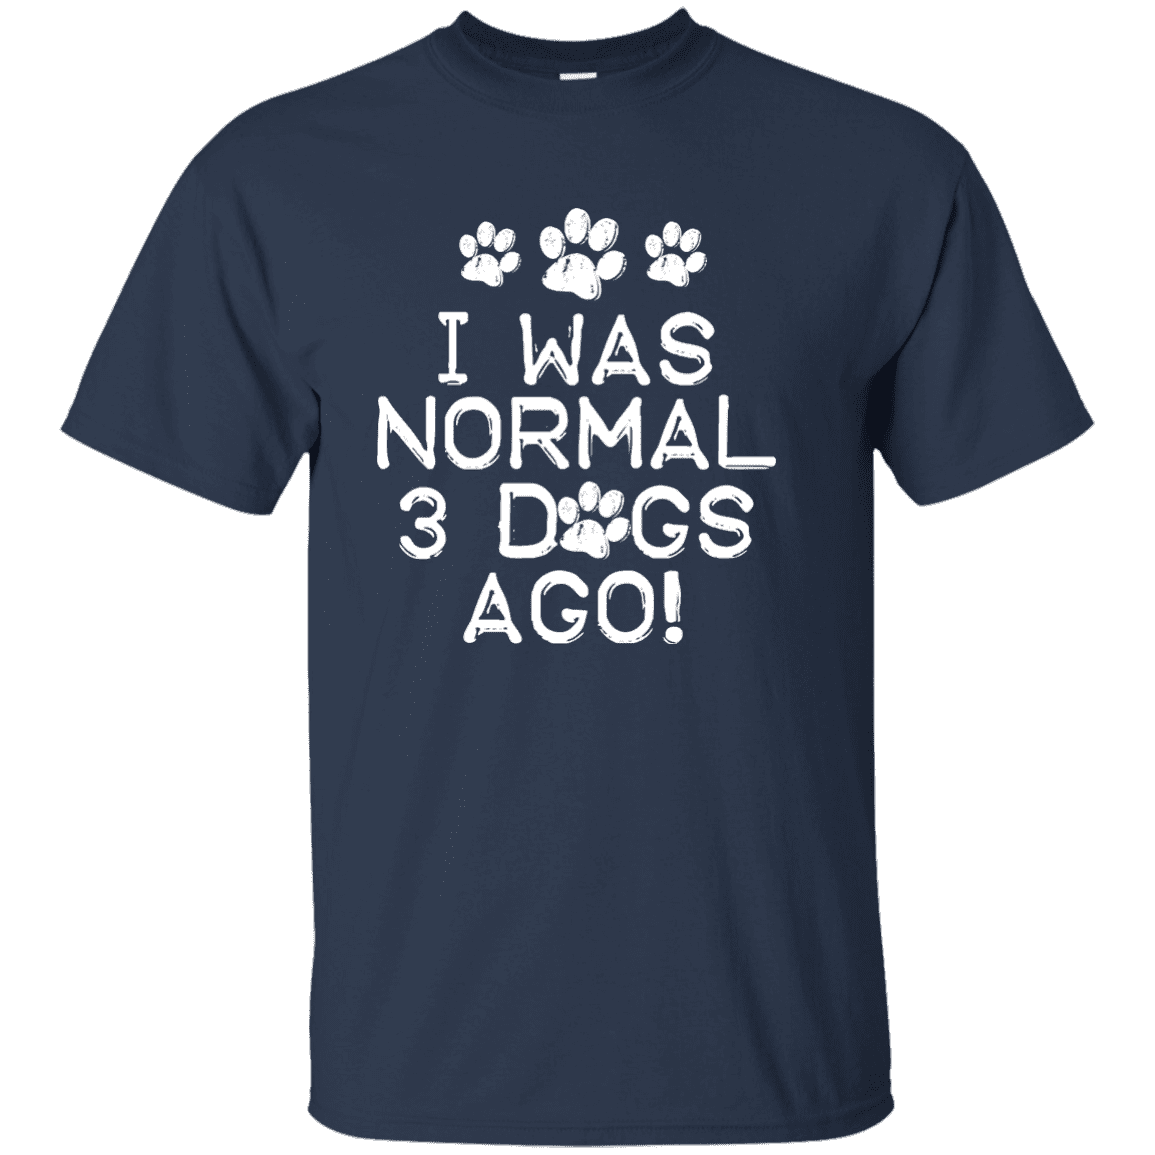 I Was Normal Dogs - T Shirt – Rescuers Club